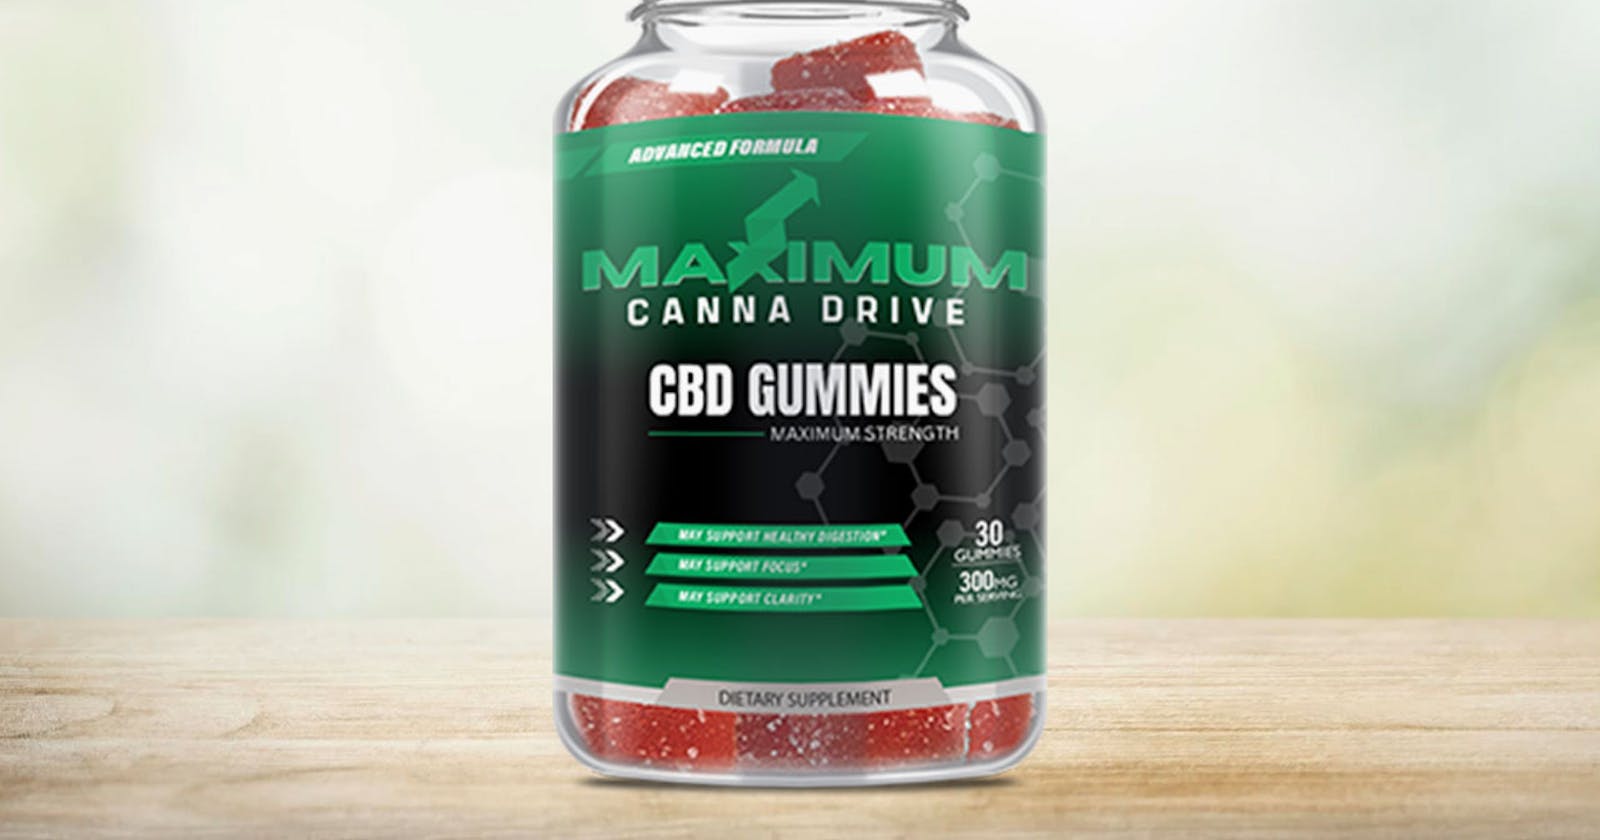 Maximum Canna Drive CBD Gummies Reviews Boost Your Sexual Performance is it trusted or Fake?